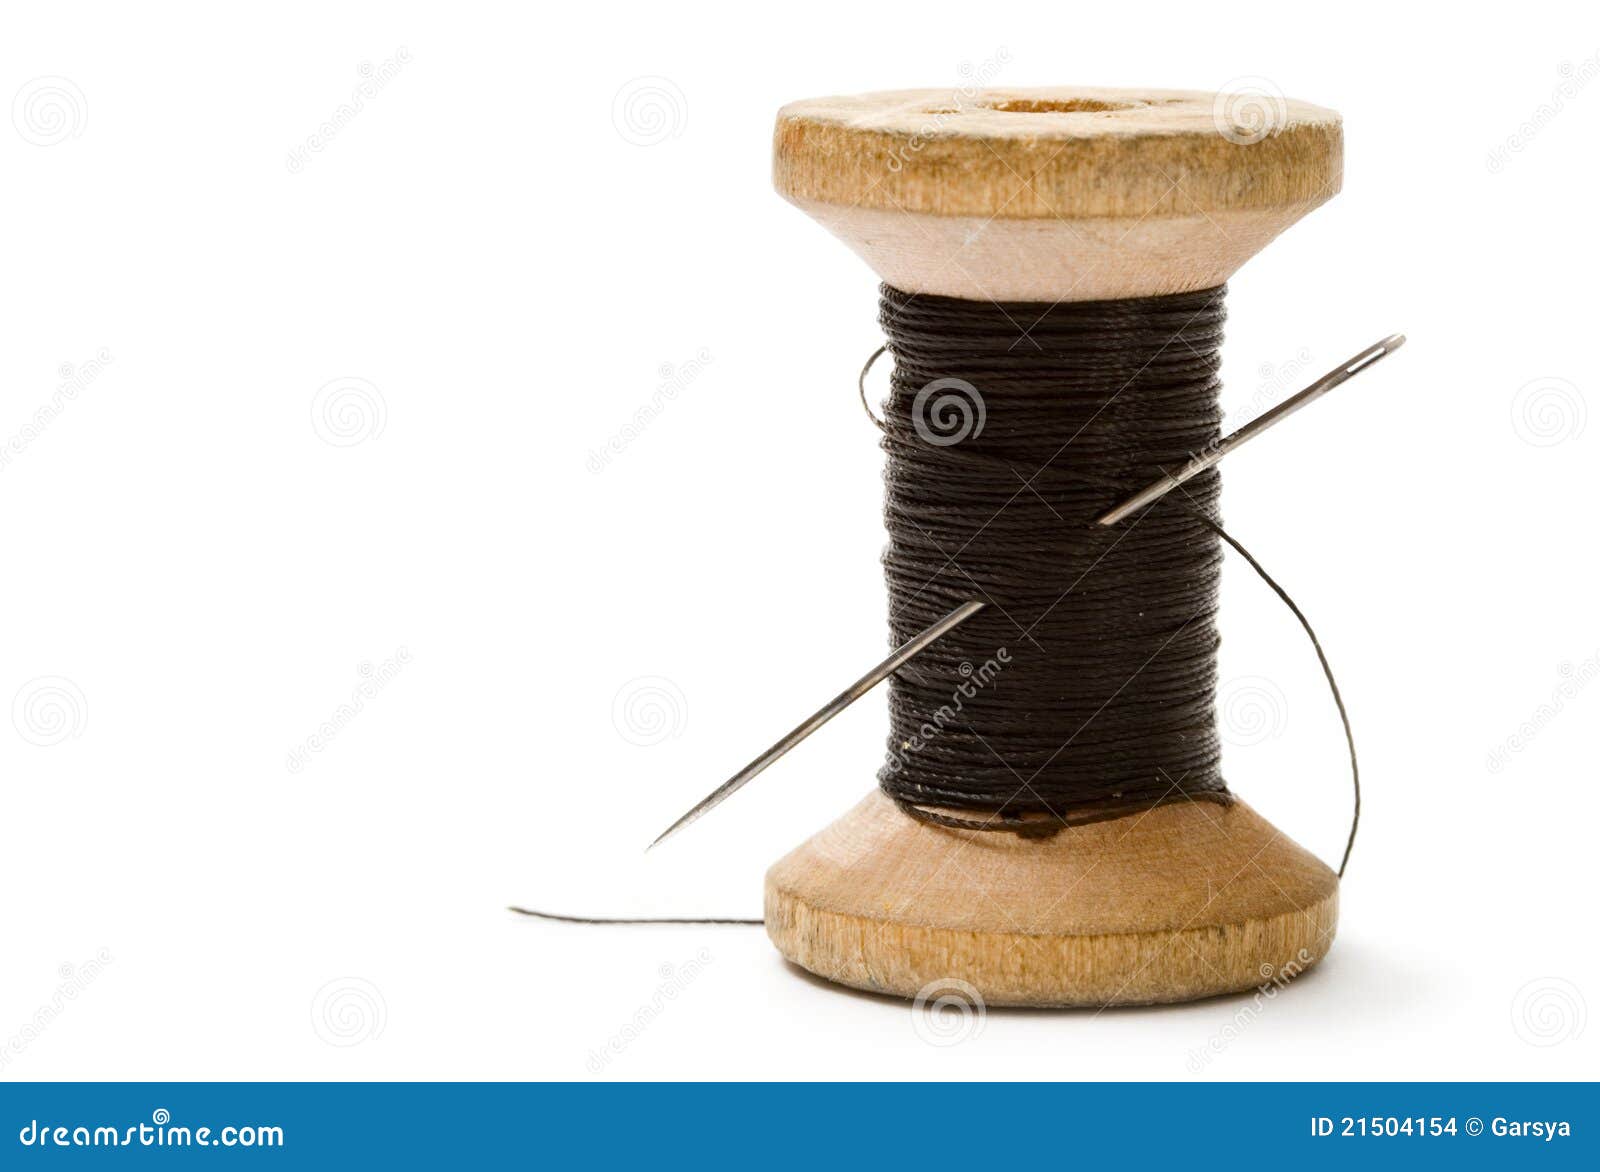 Thread bobbin stock photo. Image of detail, spindle, spool - 21504154